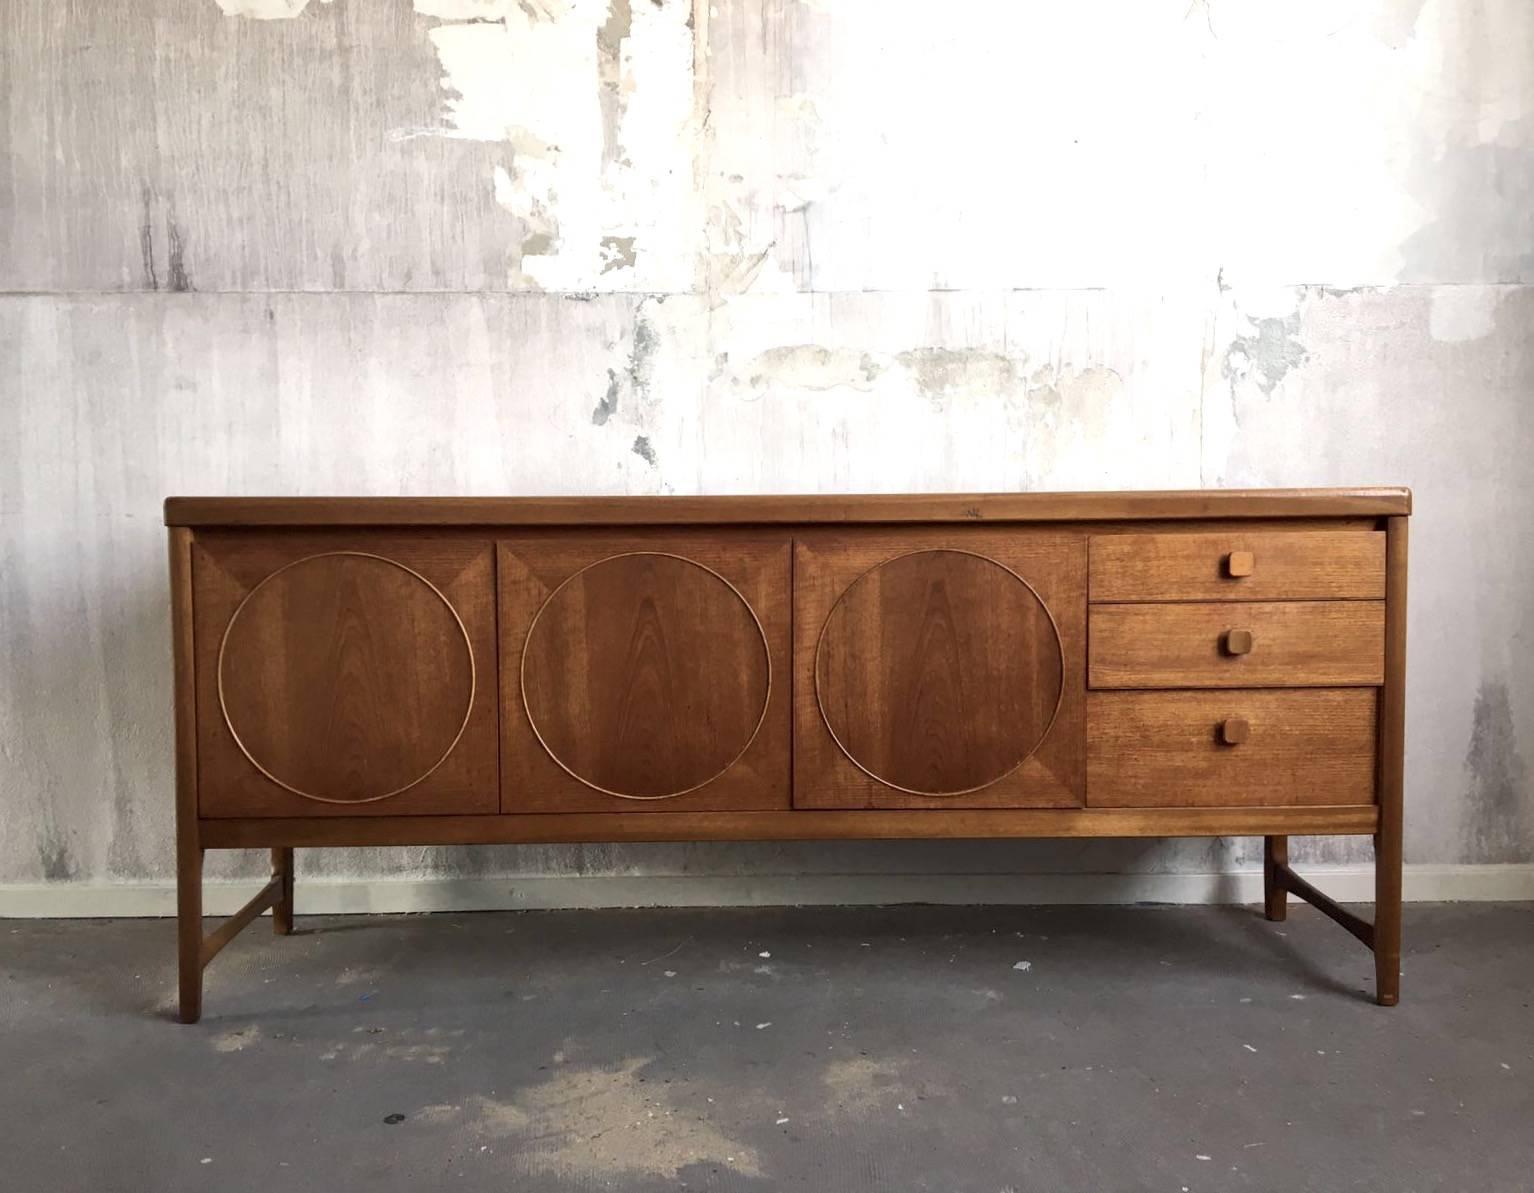 Beautiful vintage sideboard ''Circle'' designed by Patrick Lee for Nathan Furniture, circa 1960-1970. A real design Classic with Brutalist characteristics.

The sideboard features a pull-out cabinet, large main compartment with shelf and three